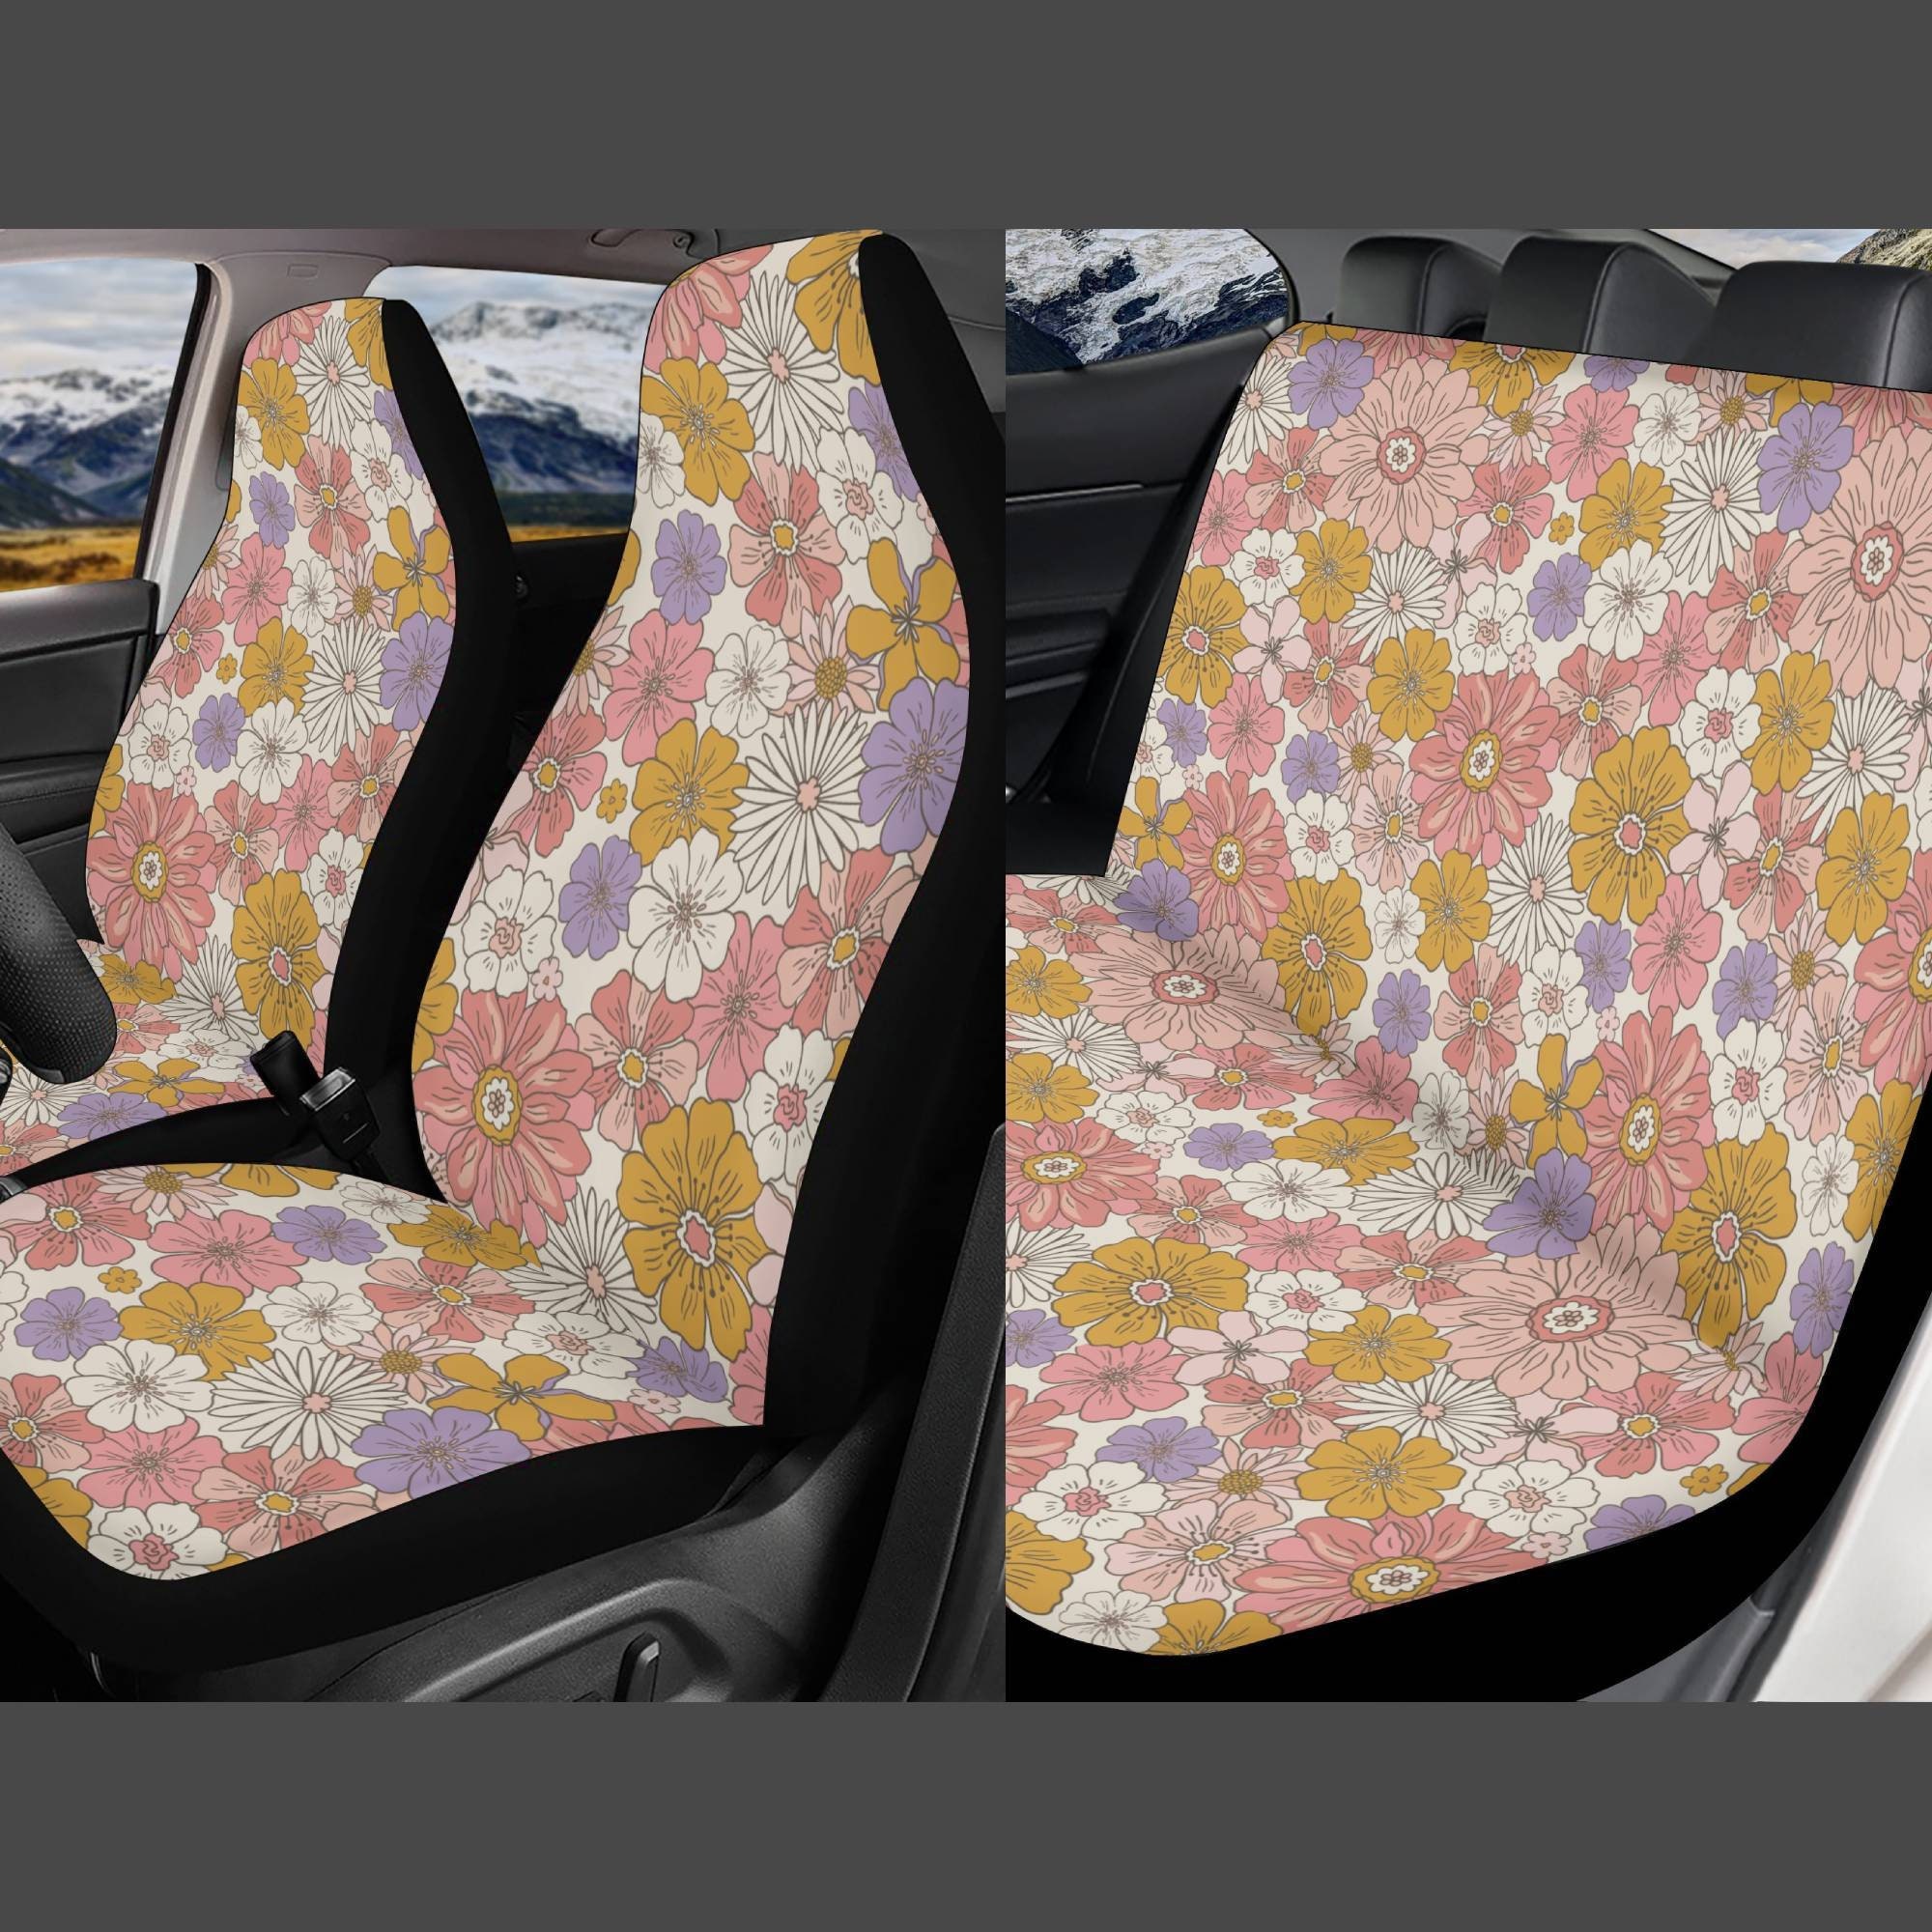 Girly Seat Covers Etsy